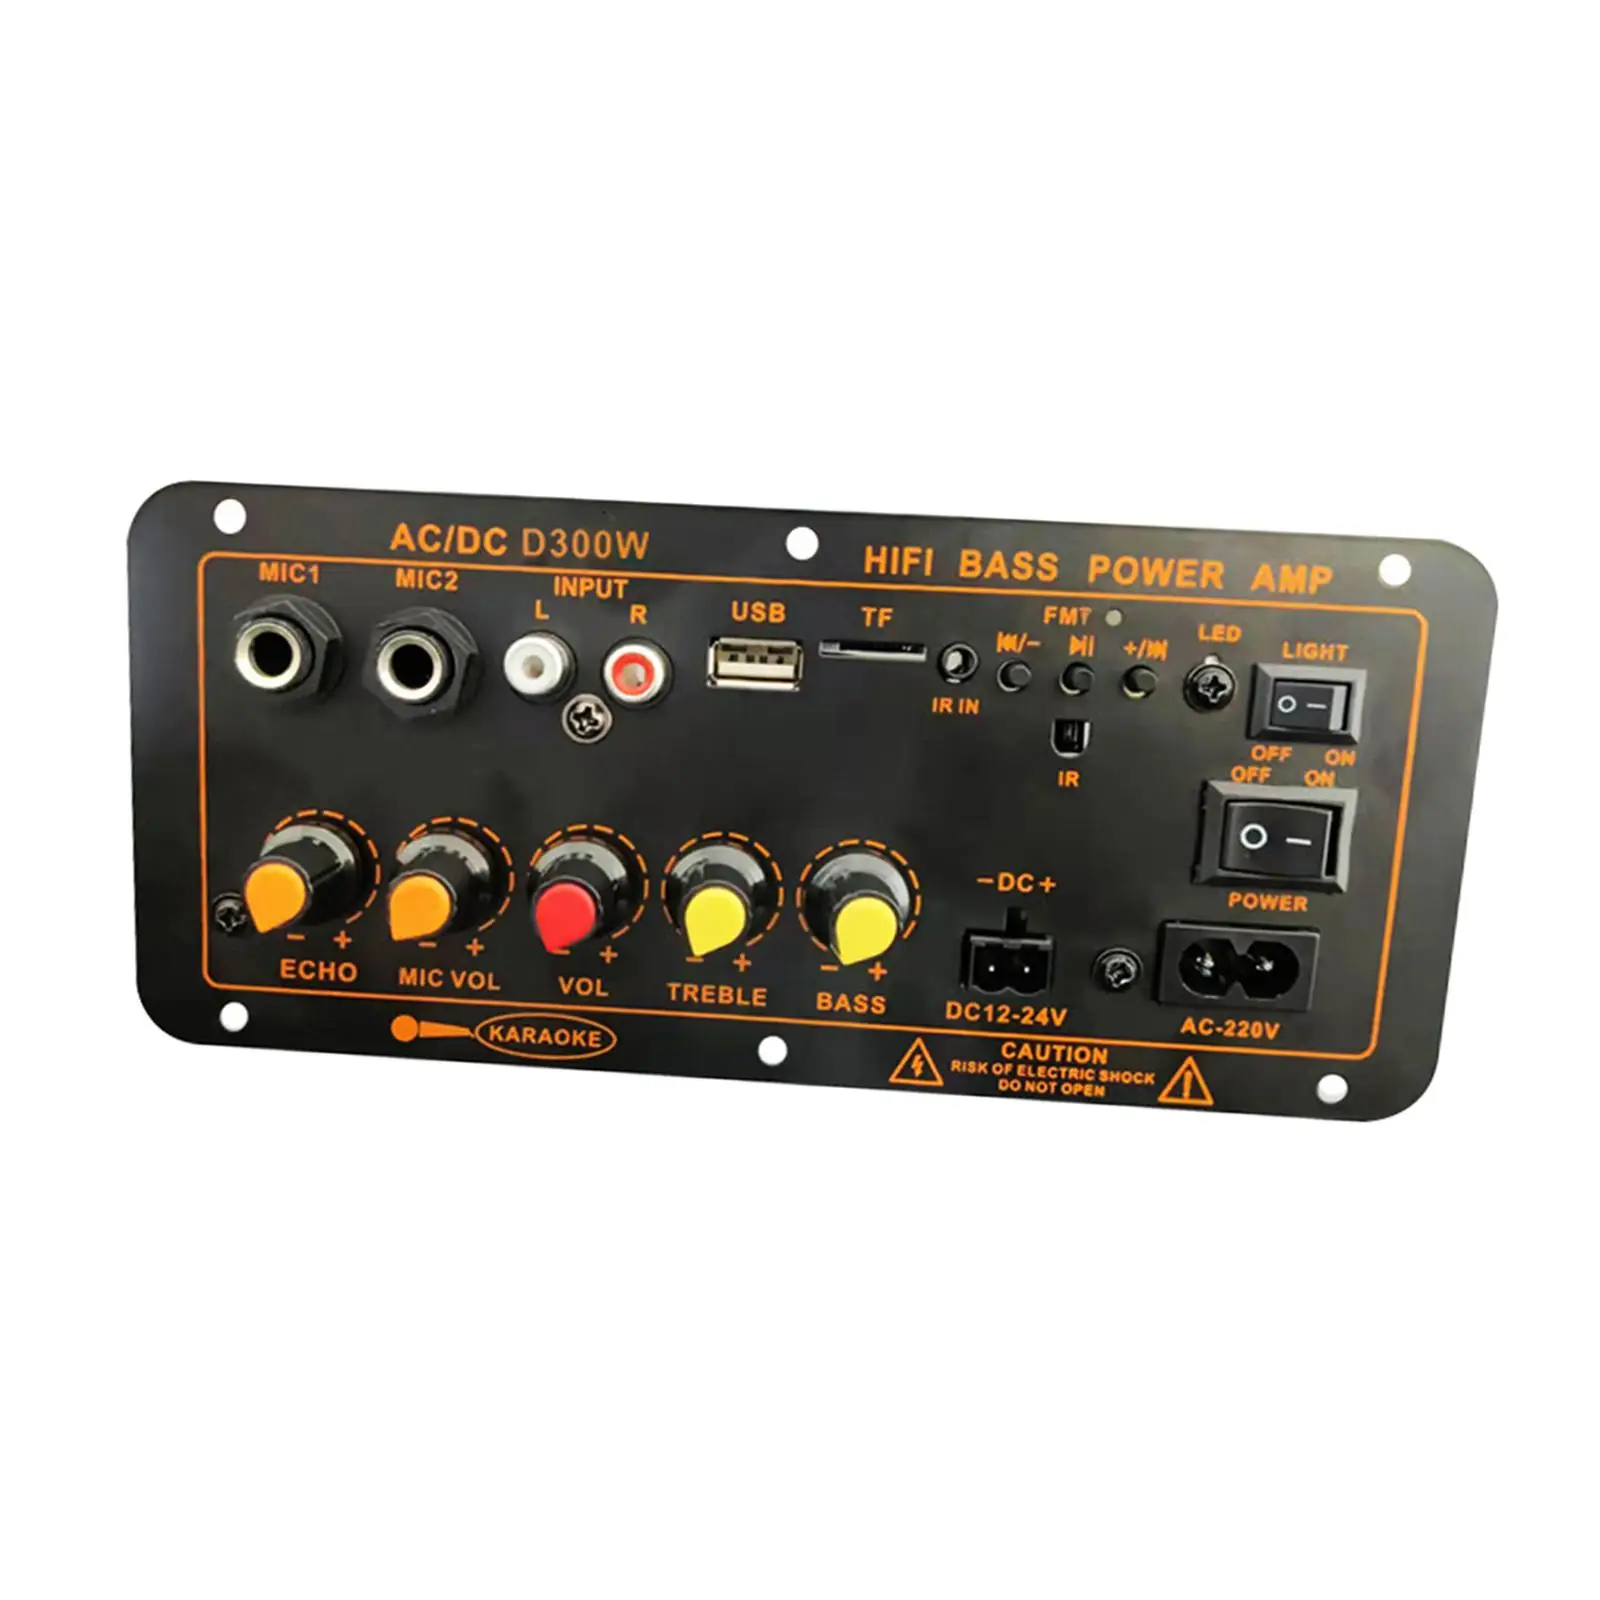 300W Bluetooth High Power Stereo Amplifier Board EU 220V Adapter Powerful Function Accessories Multiple Connectivity HiFi Bass